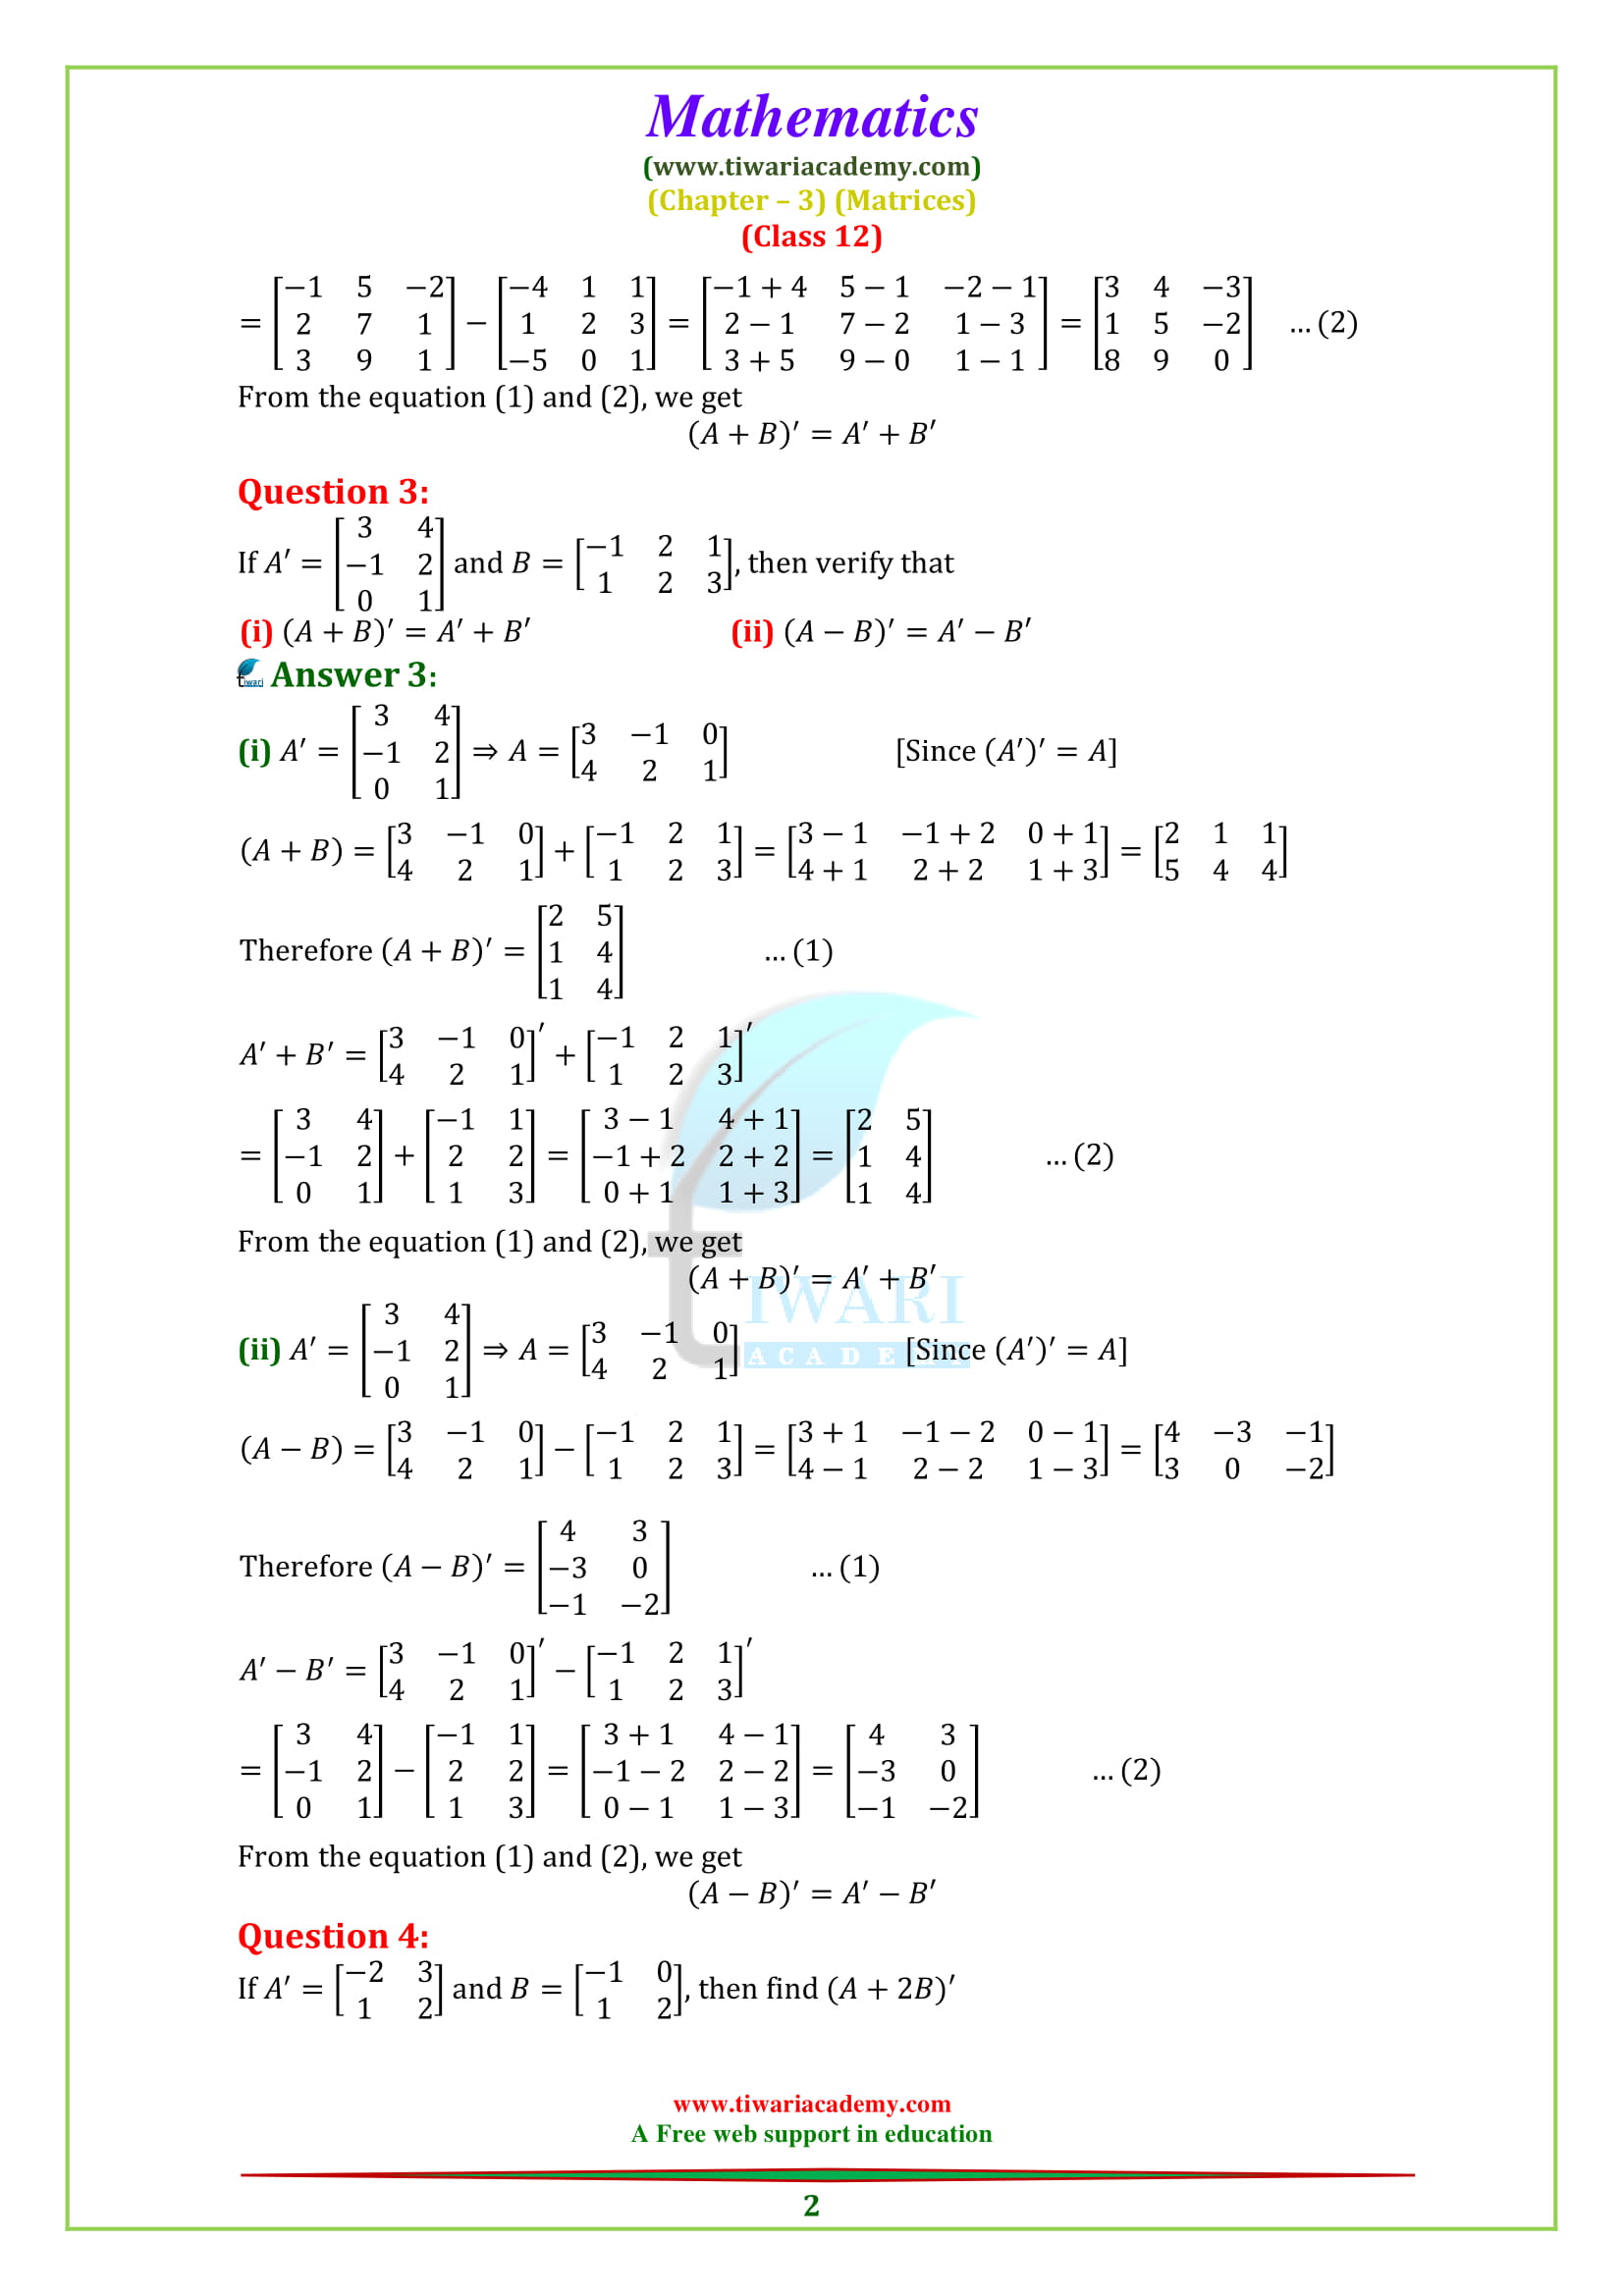 NCERT Solutions for Class 12 Maths Chapter 3 Exercise 3.3 in PDF